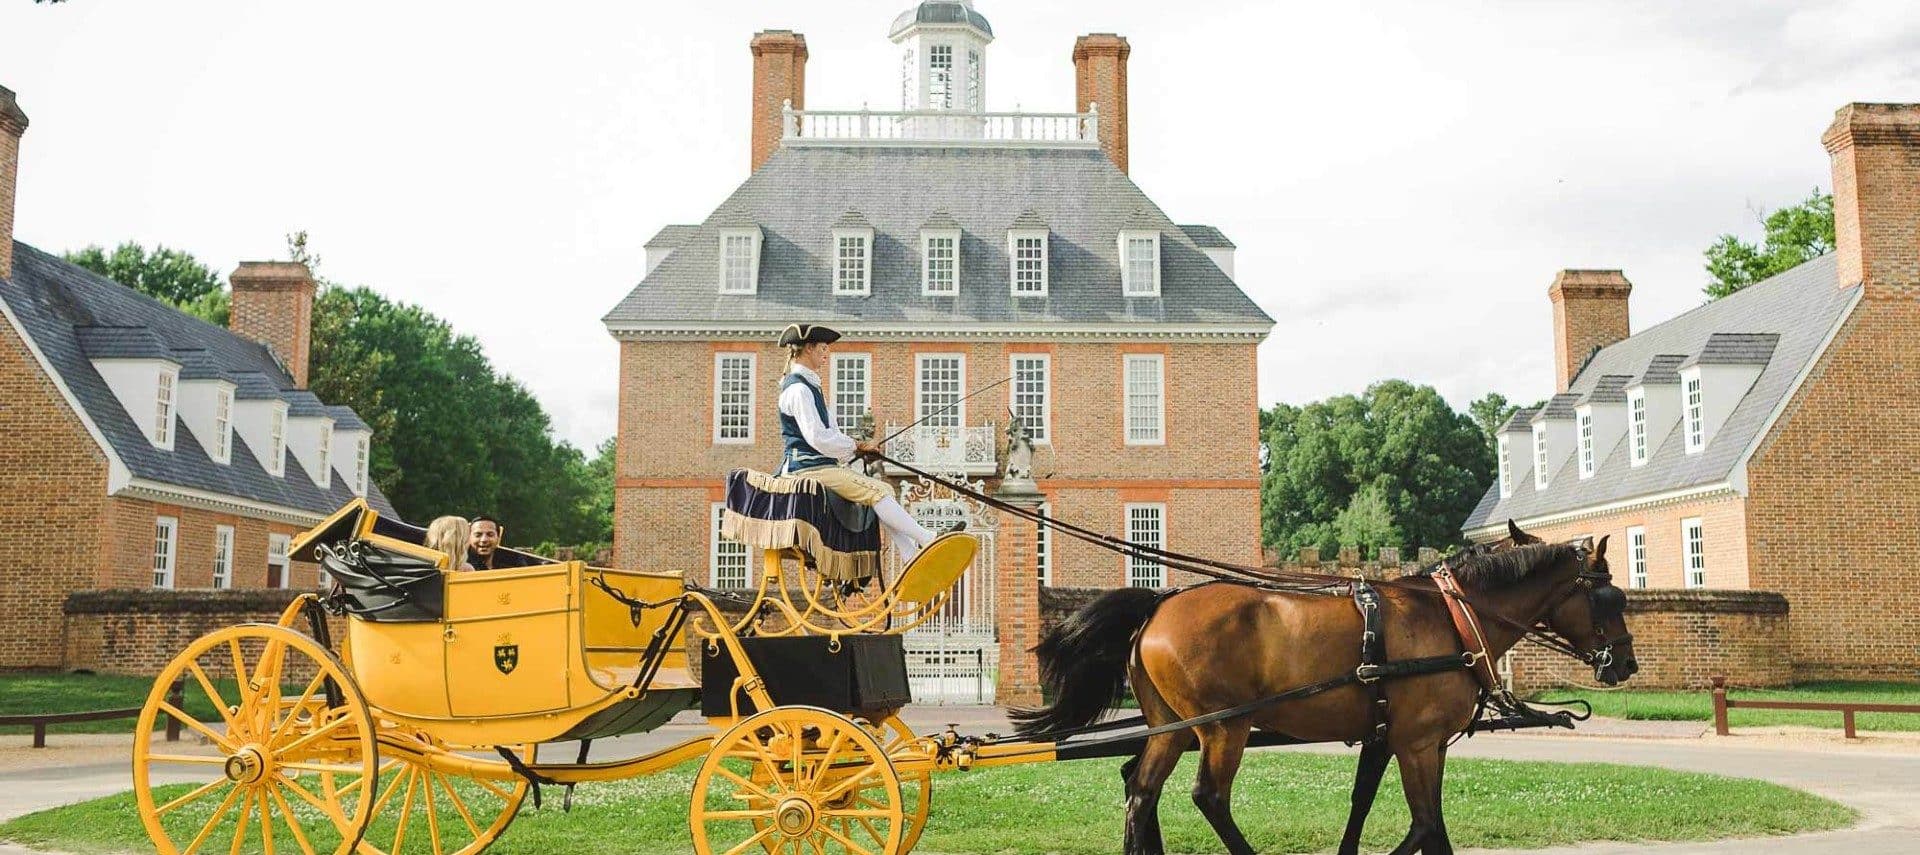 A woman in an antique carriage being pulled by two horses in front of a colonial set of homes